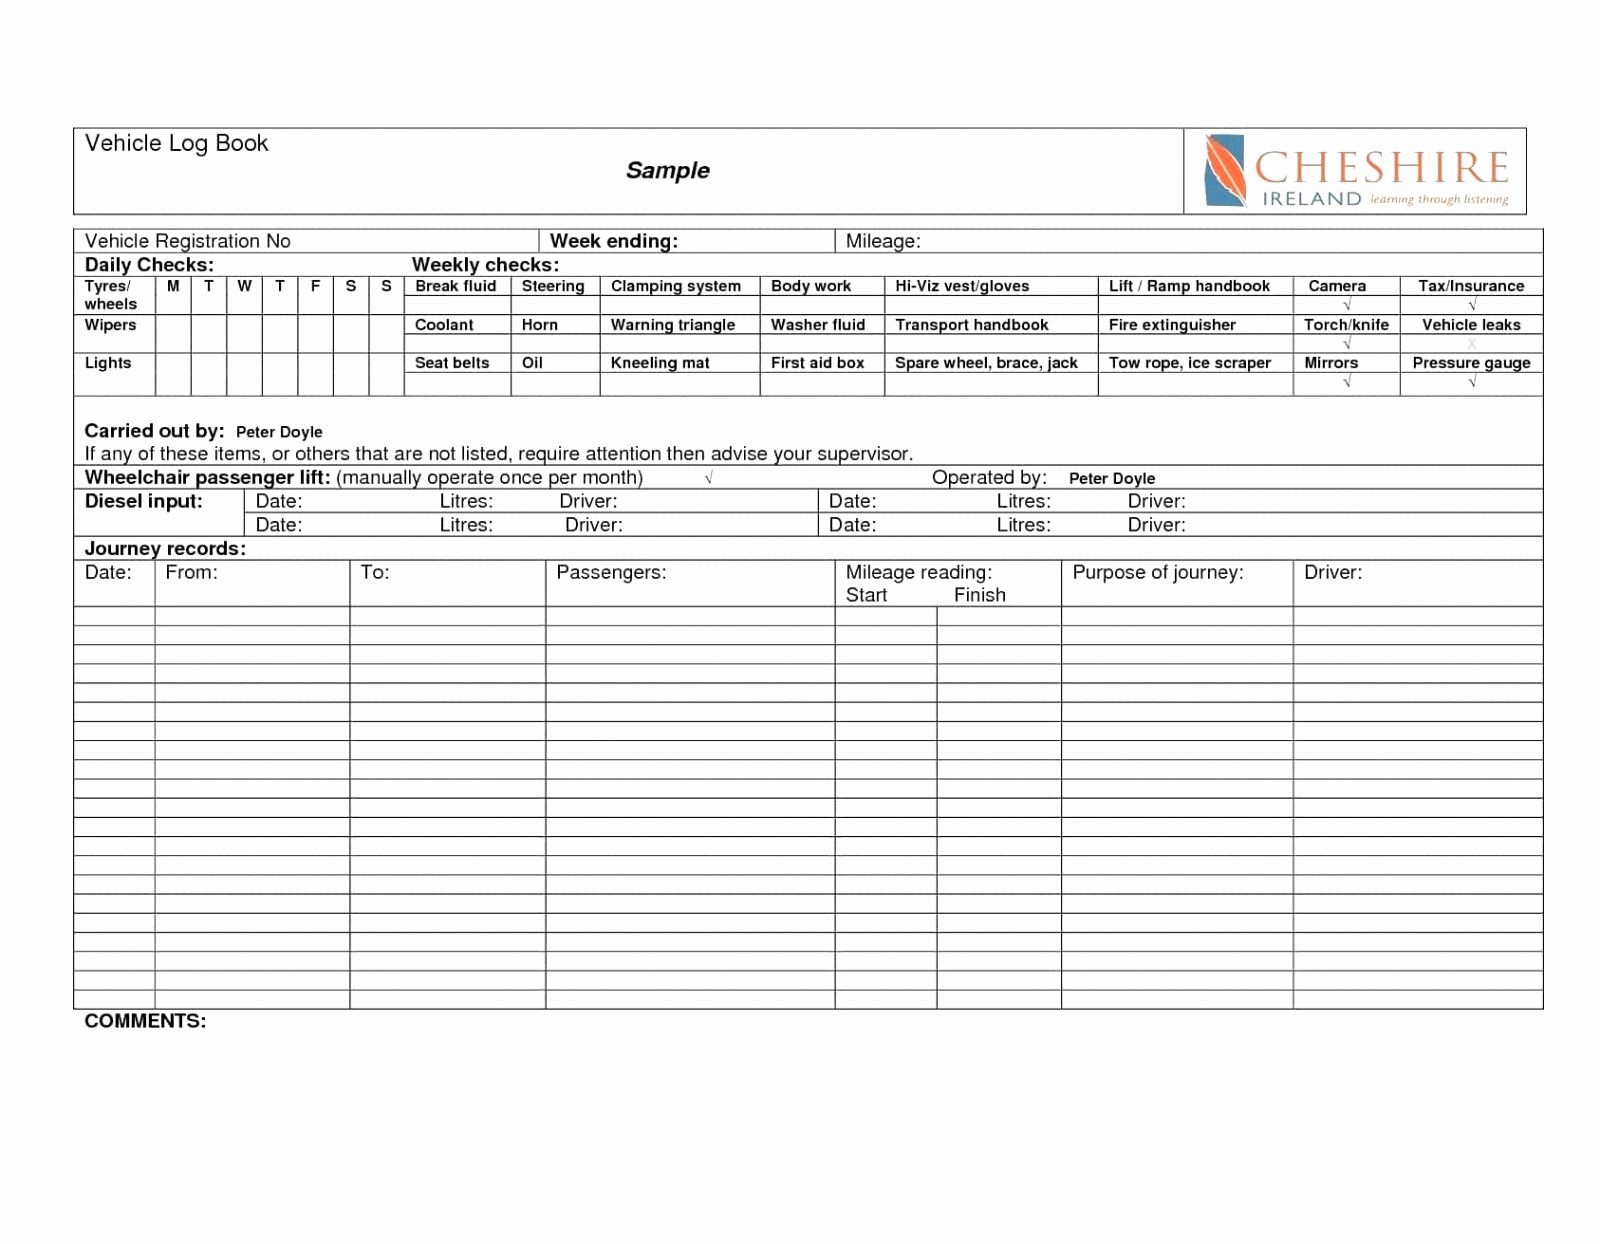 Drivers Log Sheet Template Lovely Driver Log Sheetplate Drivers Daily formplates Example